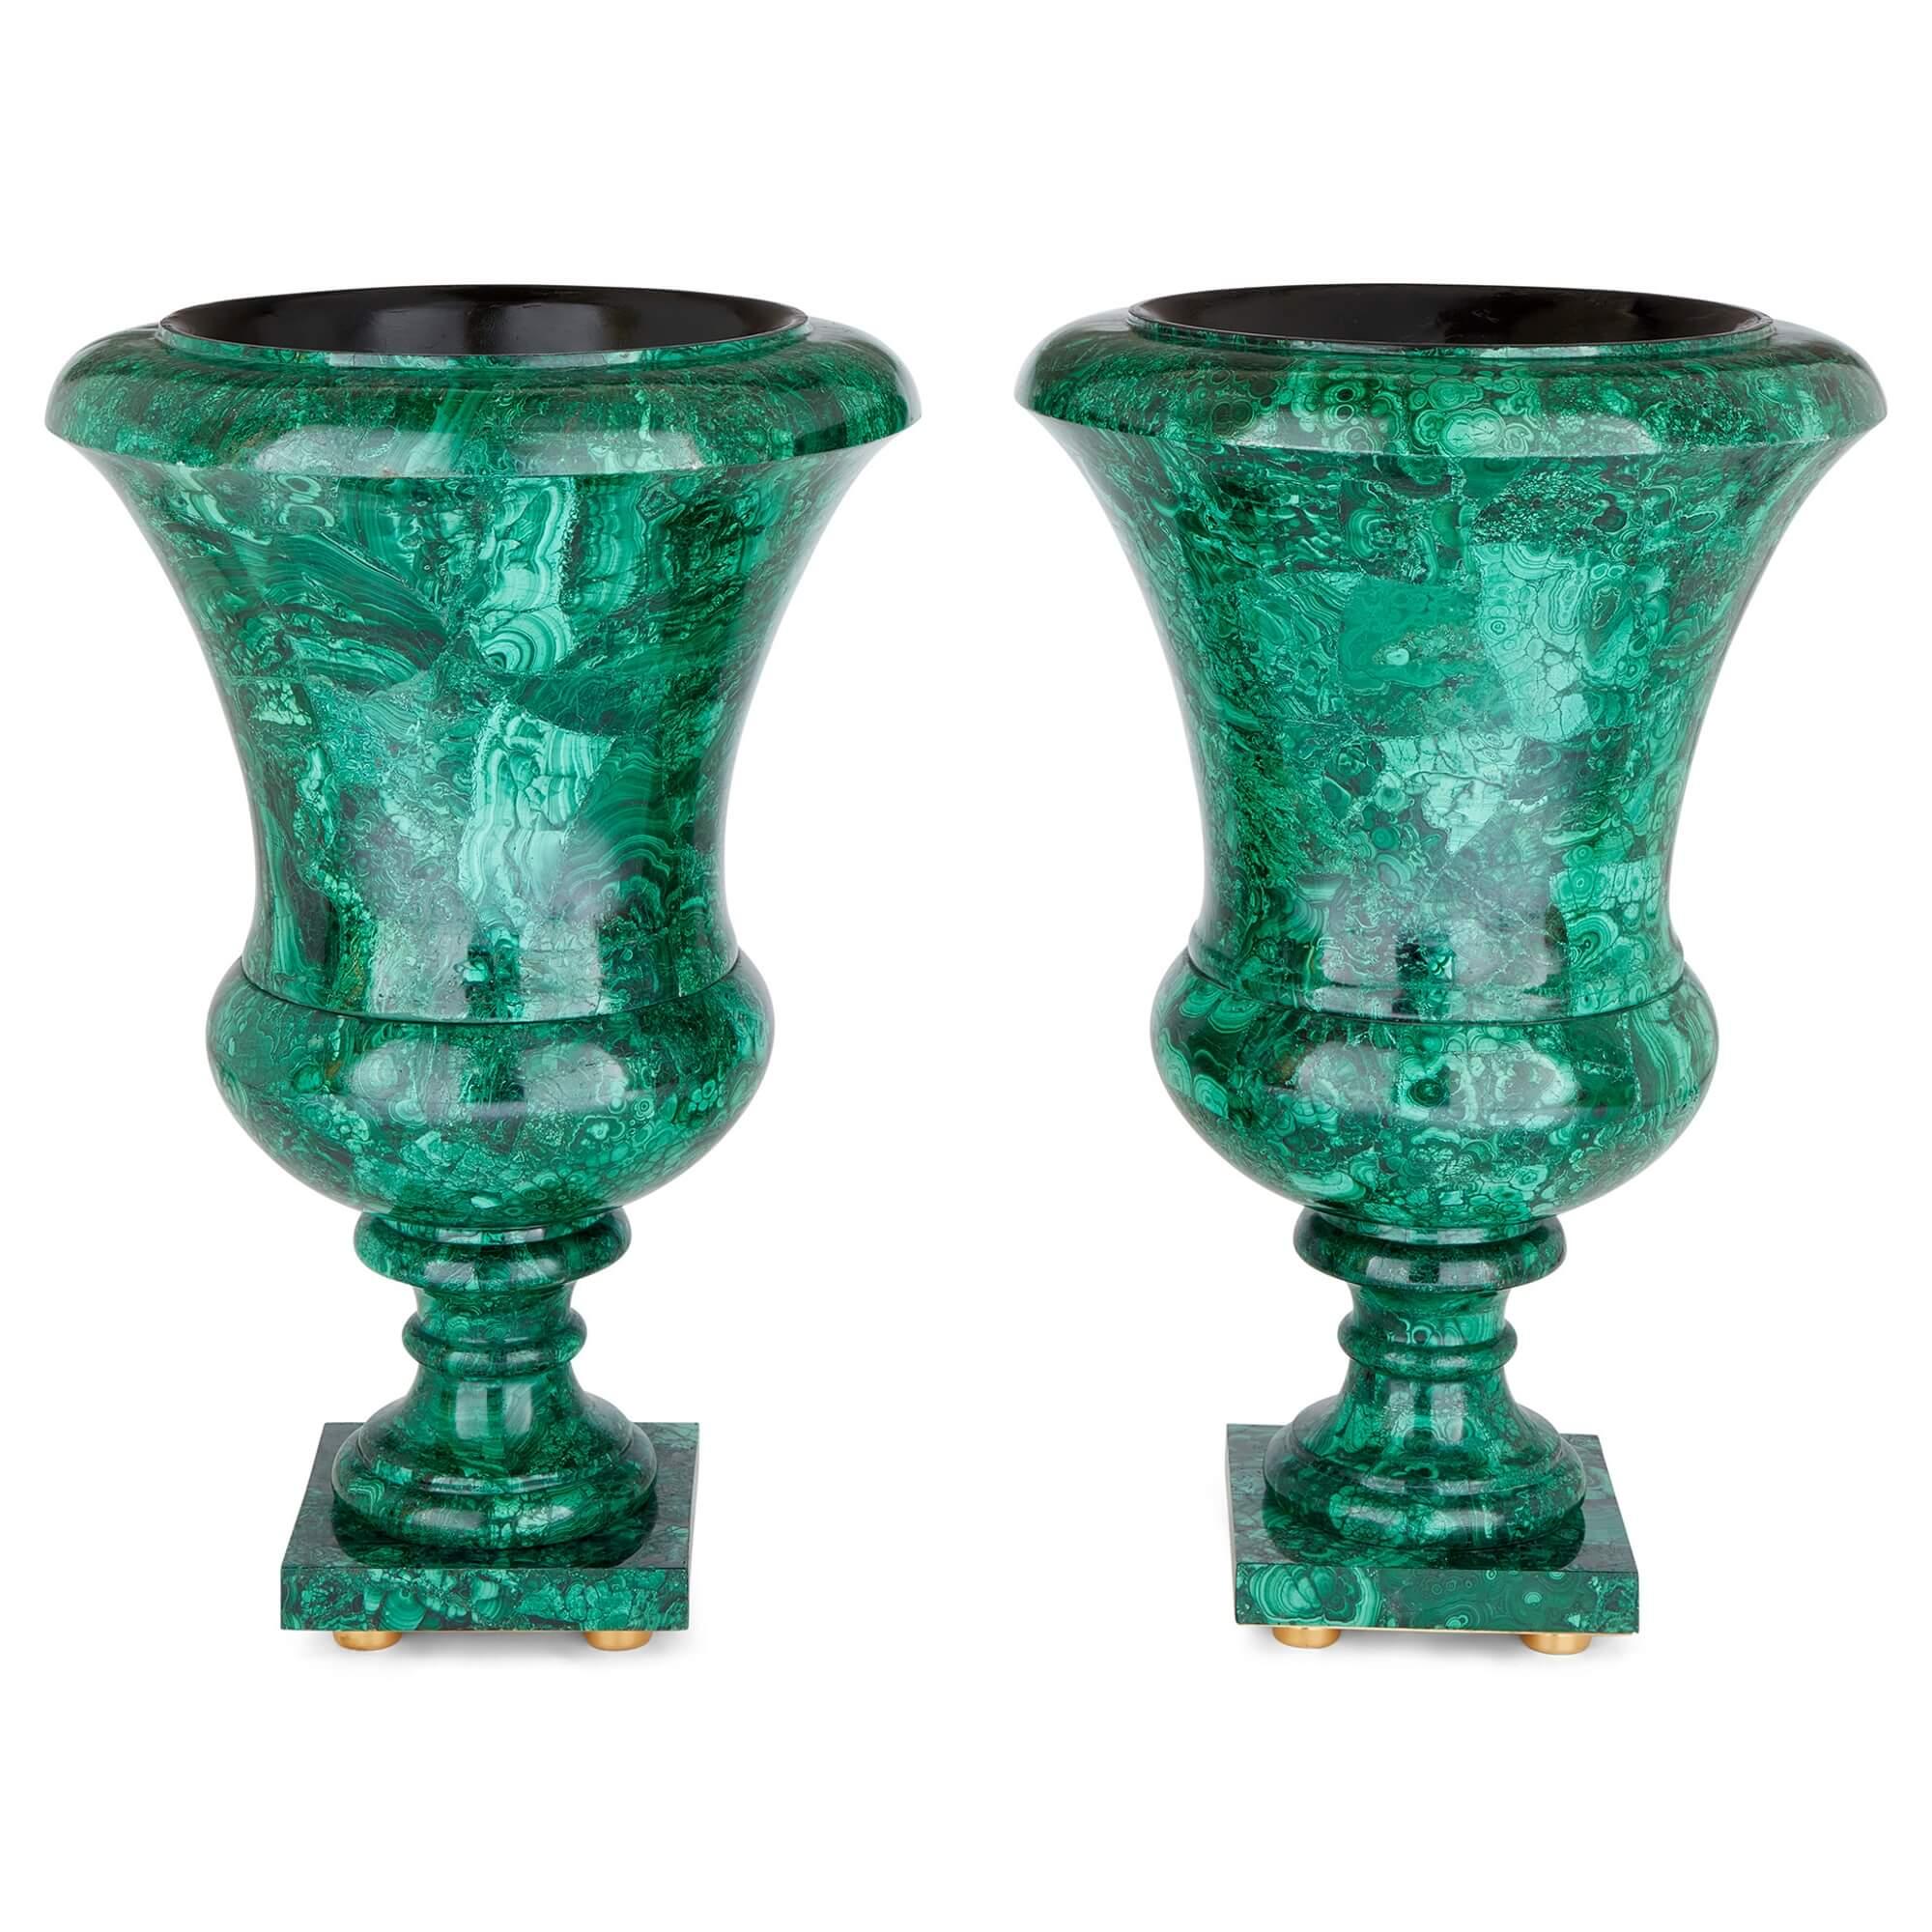 Pair of large French malachite vases 
French, 20th Century 
Height 77cm, diameter 50cm

Of campana form, this stylish pair of vases is crafted from malachite and gilt bronze. A malachite veneer covers the entirety of the vases, its bright green hue